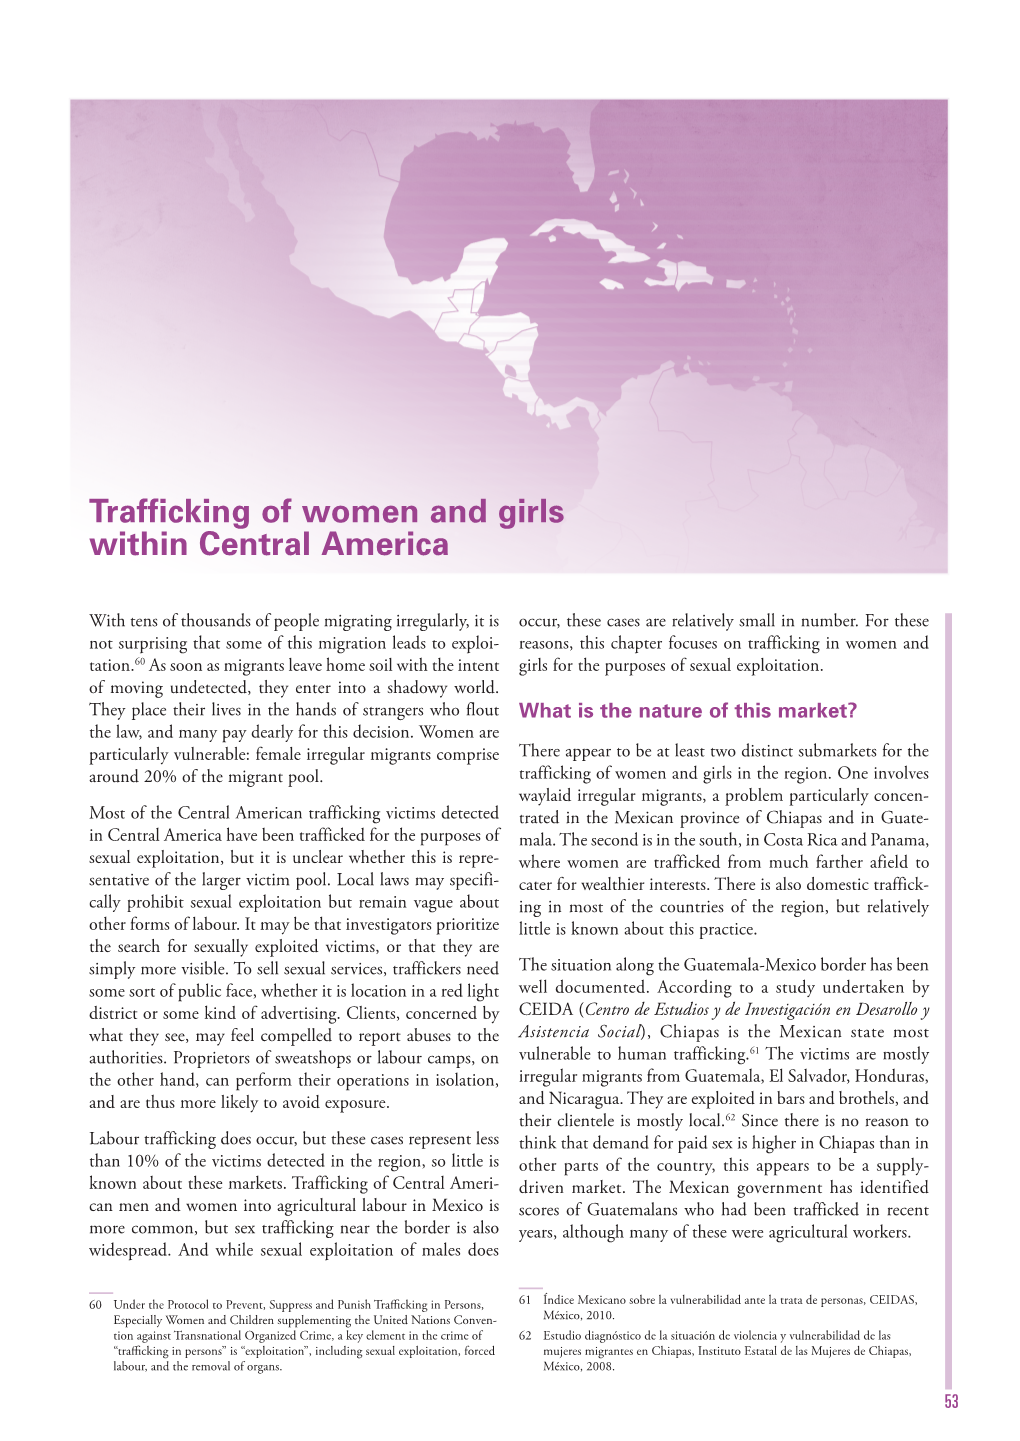 Trafficking of Women and Girls Within Central America